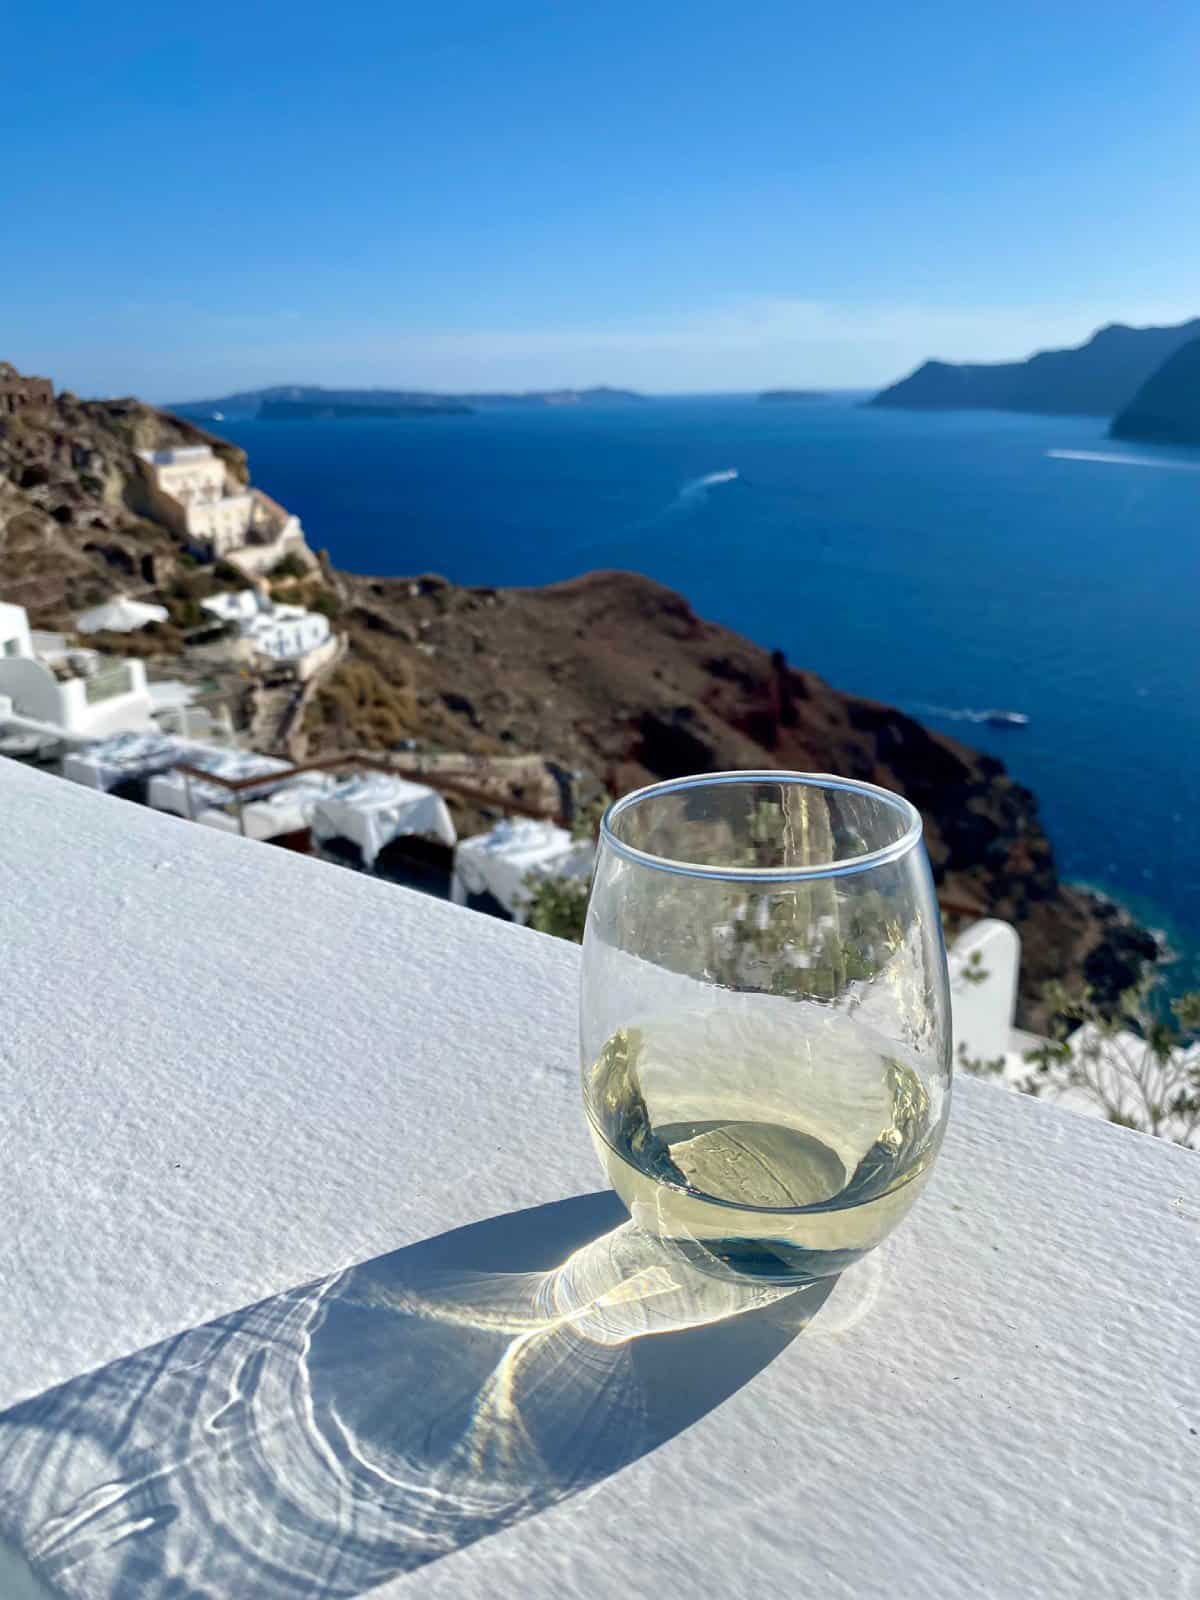 Things to do in Oia, Santorini | Is Oia worth visiting? A guide to Santorini's most famous town...what to do in Oia, where to eat, the best Oia cave hotels, helpful tips, & I share the awesome parts & the terrible touristy parts so you can decide if Oia deserves a spot on your Greek islands itinerary. #oia #santorini #greekislands 